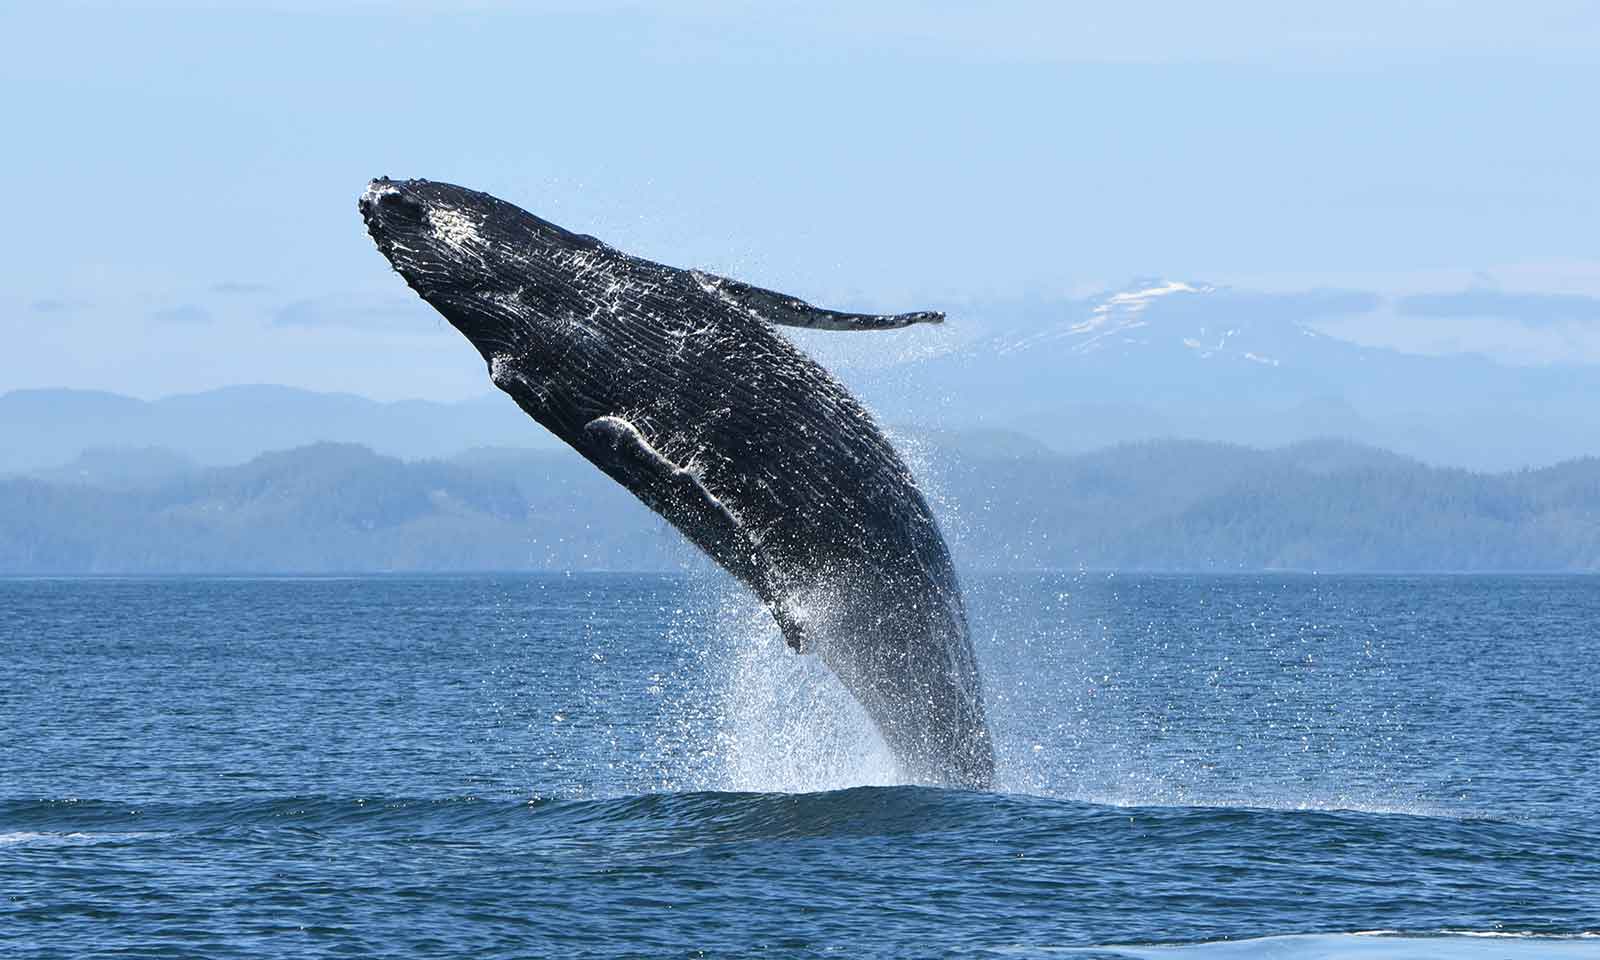 mers marine education research society whale mostly above water splashing